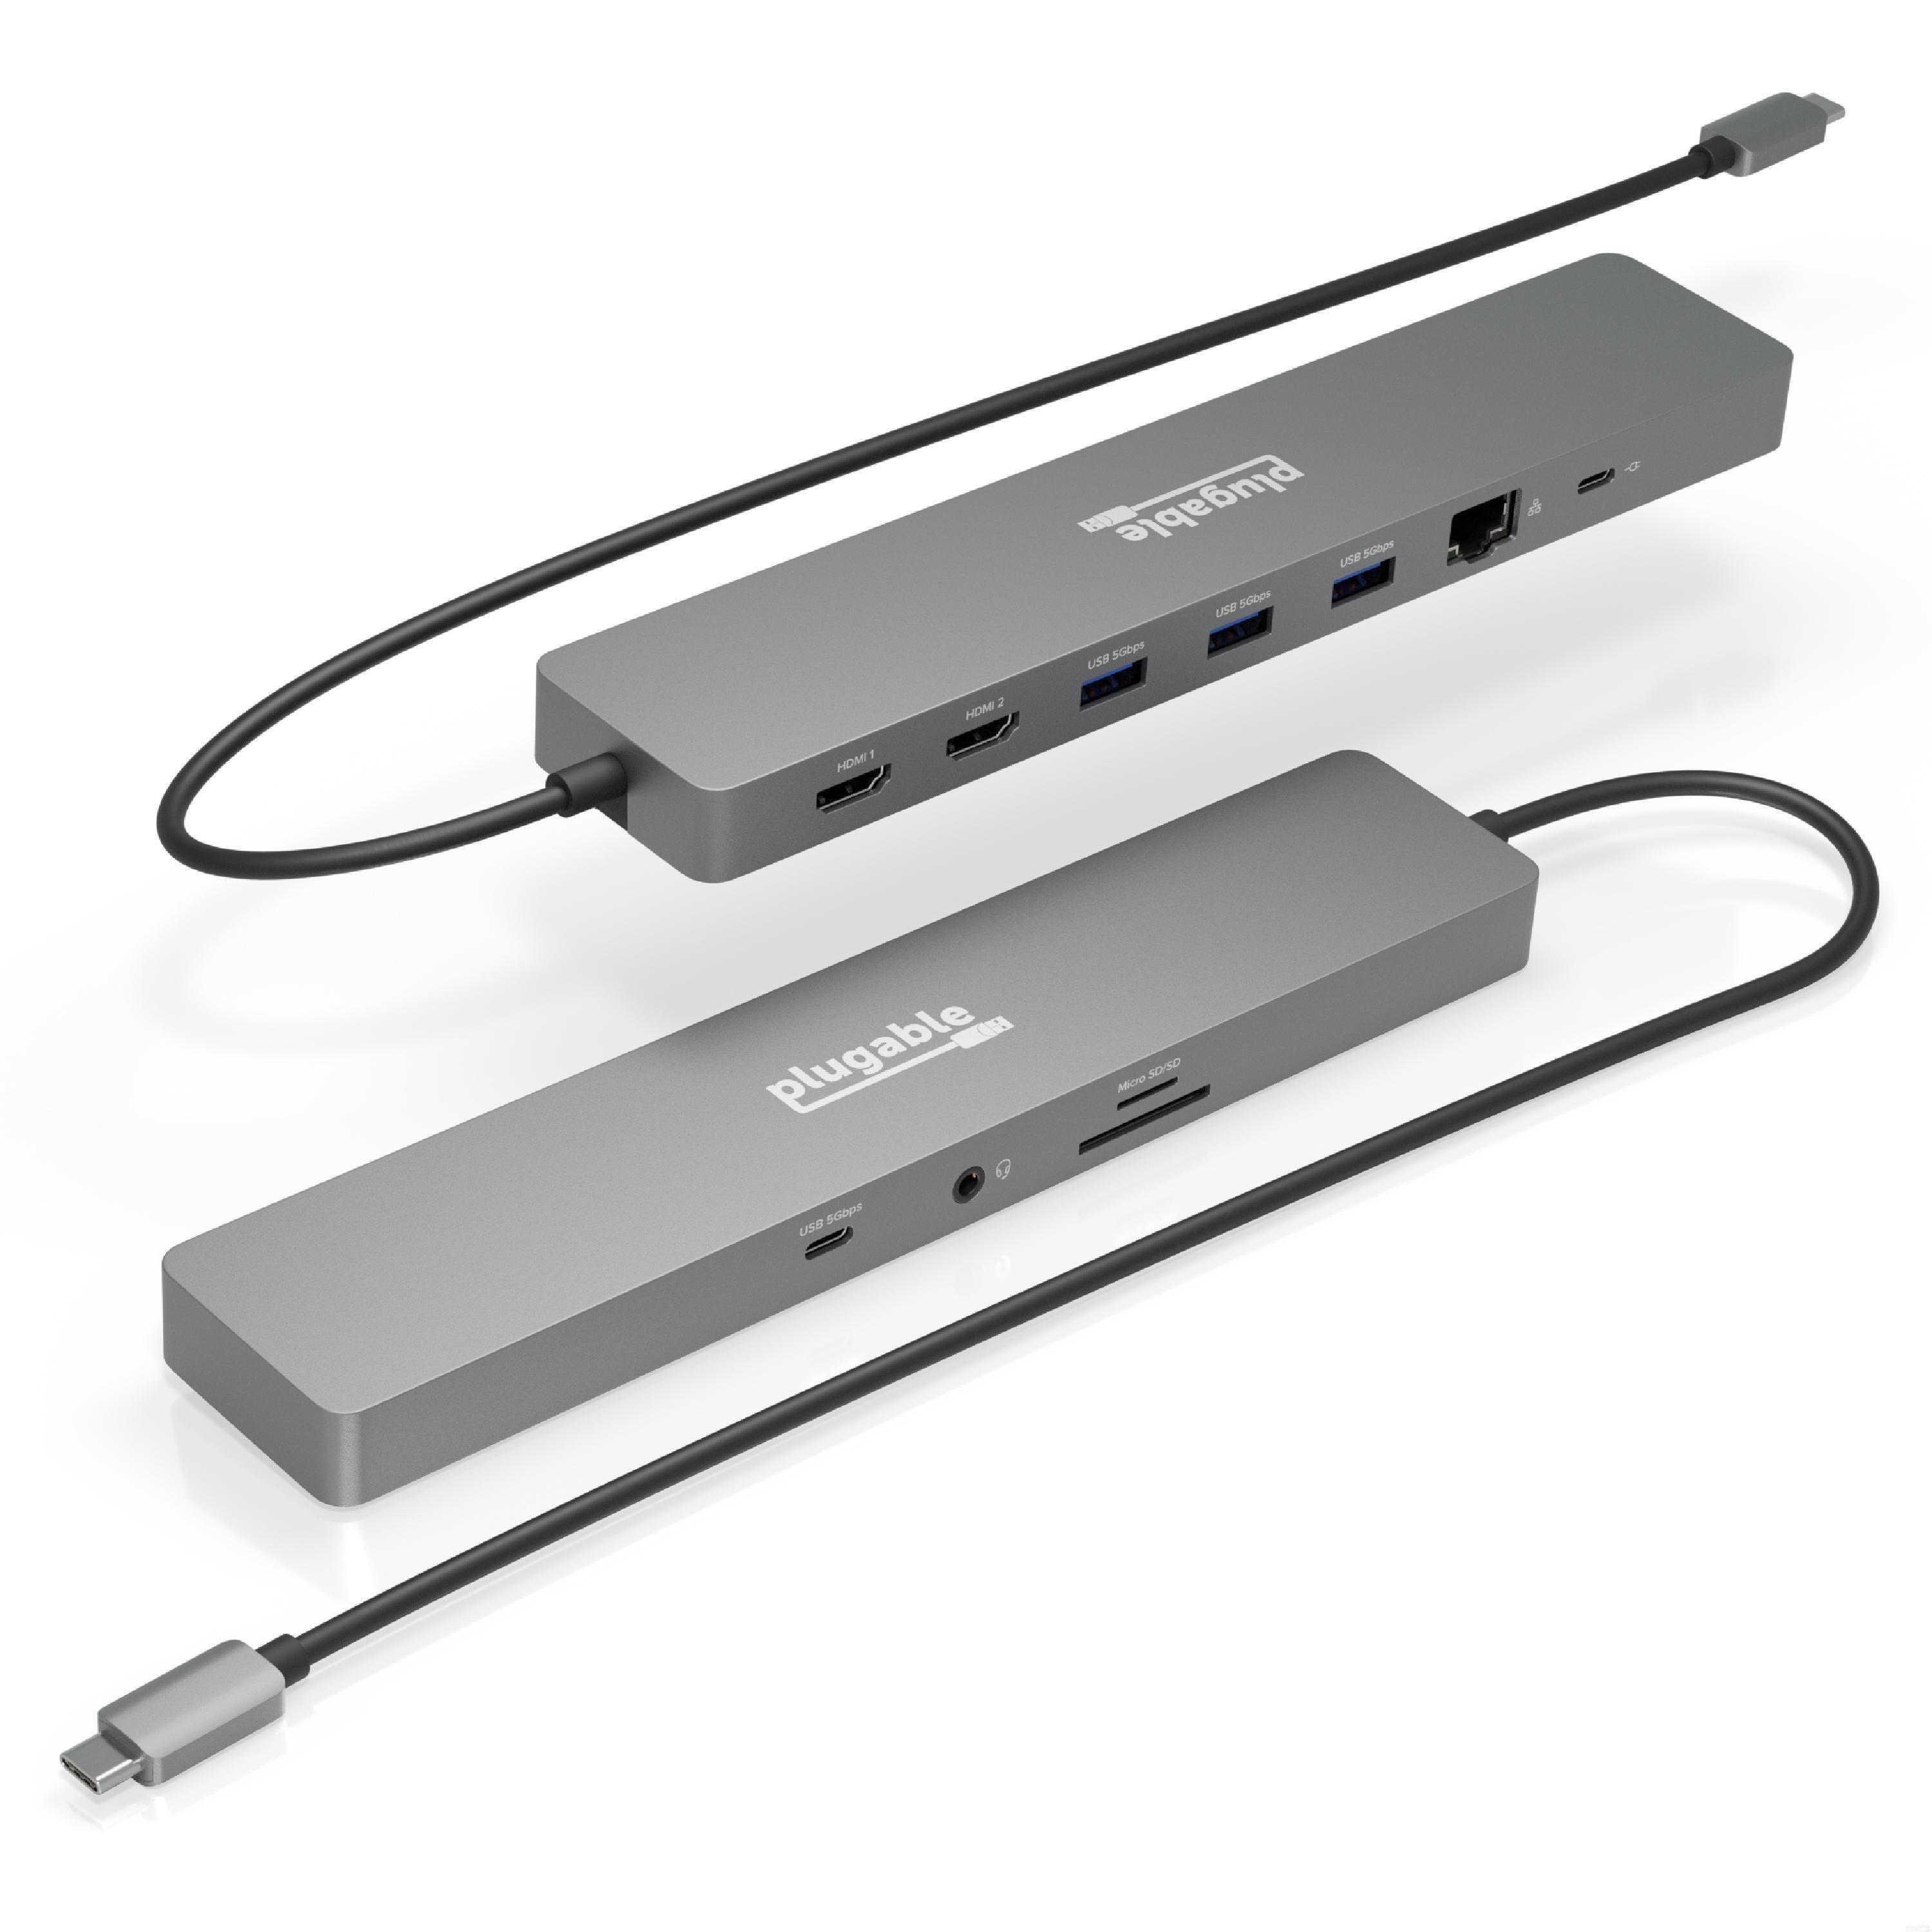 Plugable　Plugable　–　Ethernet　Technologies　USB-C　Hub　11-in-1　with